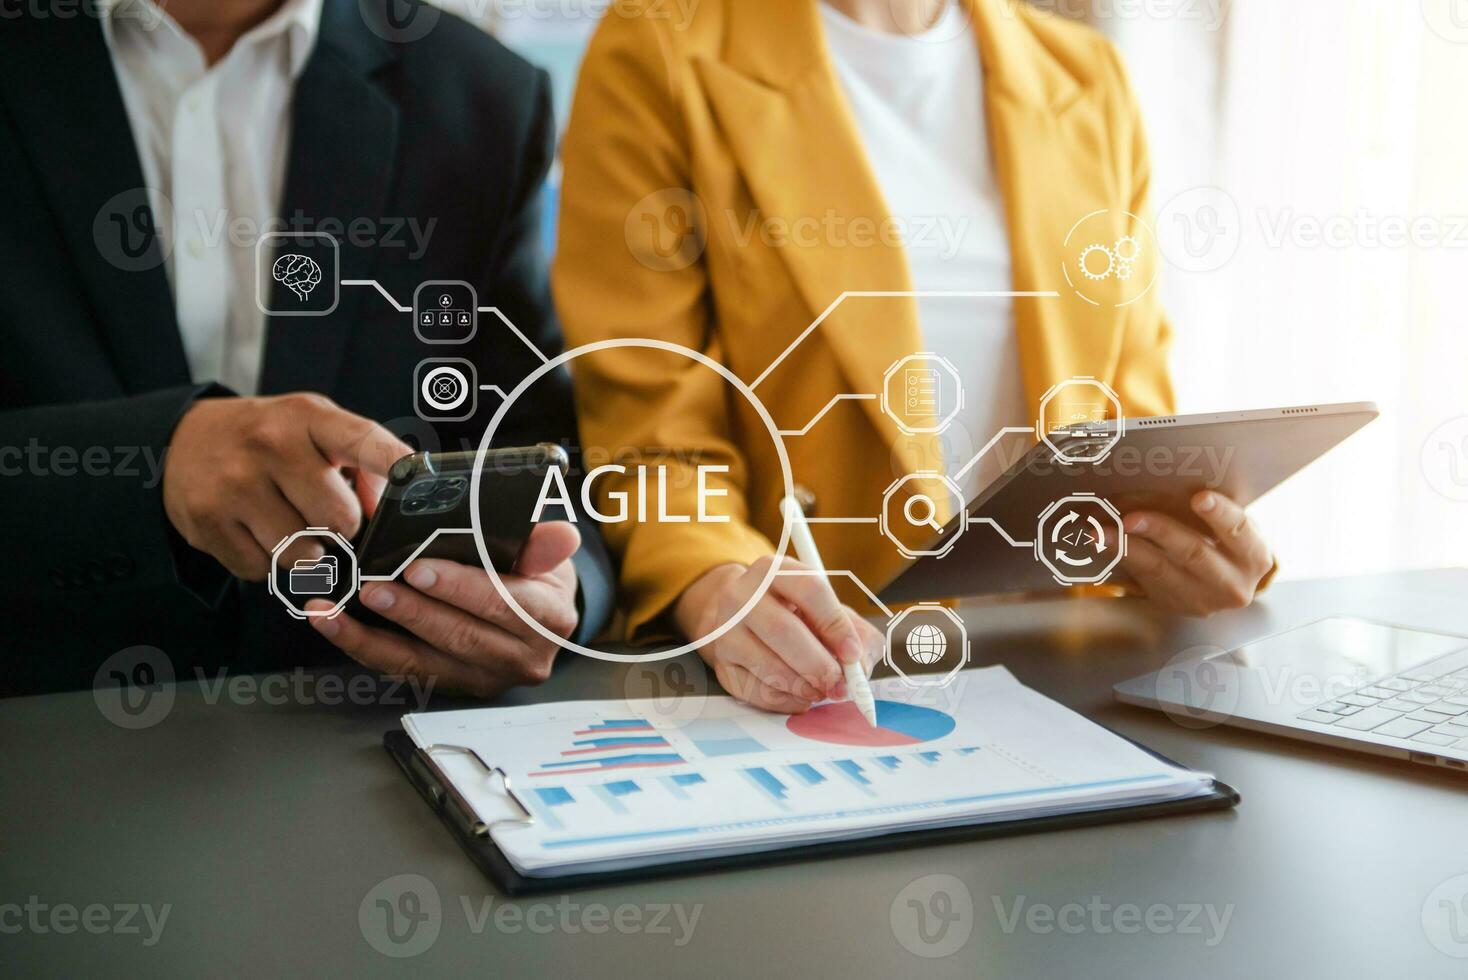 Agile development methodology concept. Business hand using laptop computer and tablet with virtual screen Agile icon on modern office photo